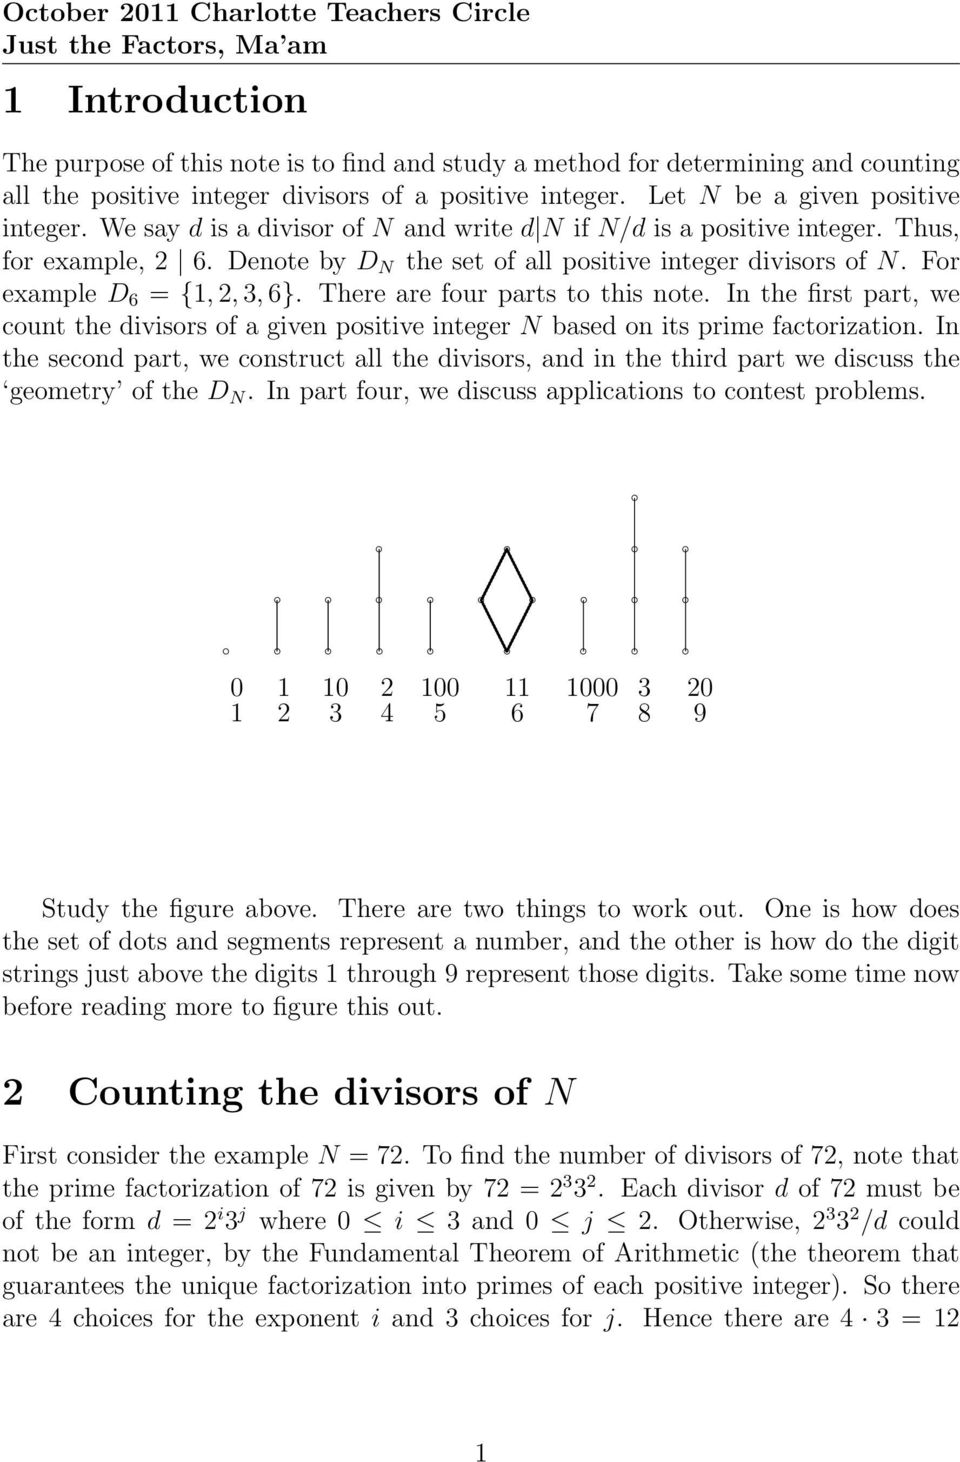 note In the first part, we count the divisors of a given positive integer N based on its prime factorization In the second part, we construct all the divisors, and in the third part we discuss the